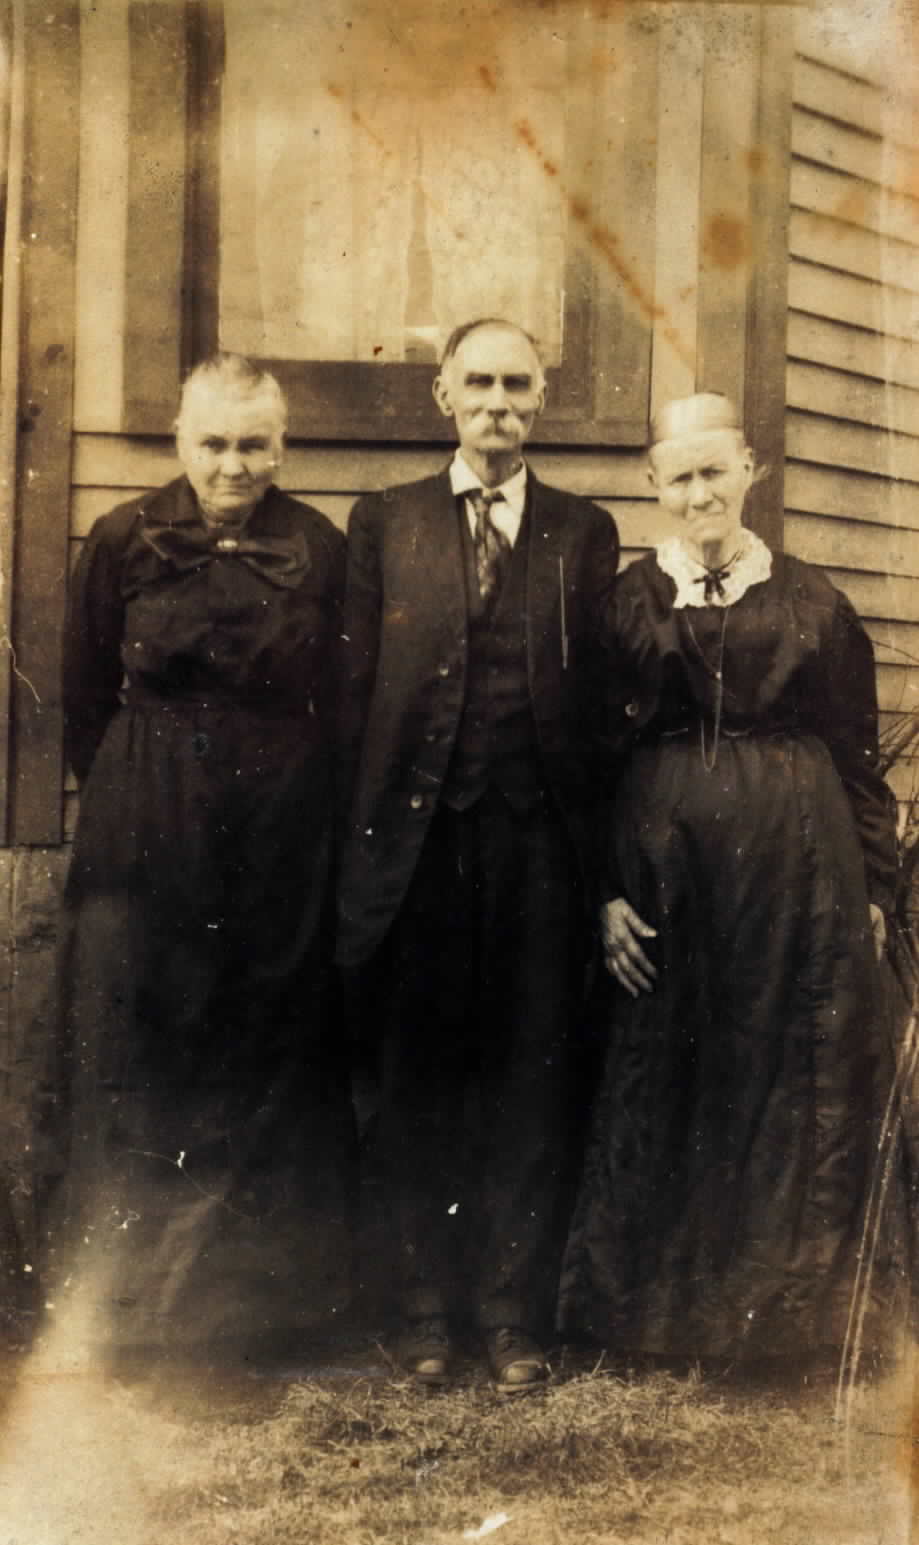 Leander Jarrell, Mary Margaret Crum, and Mary Jarrell